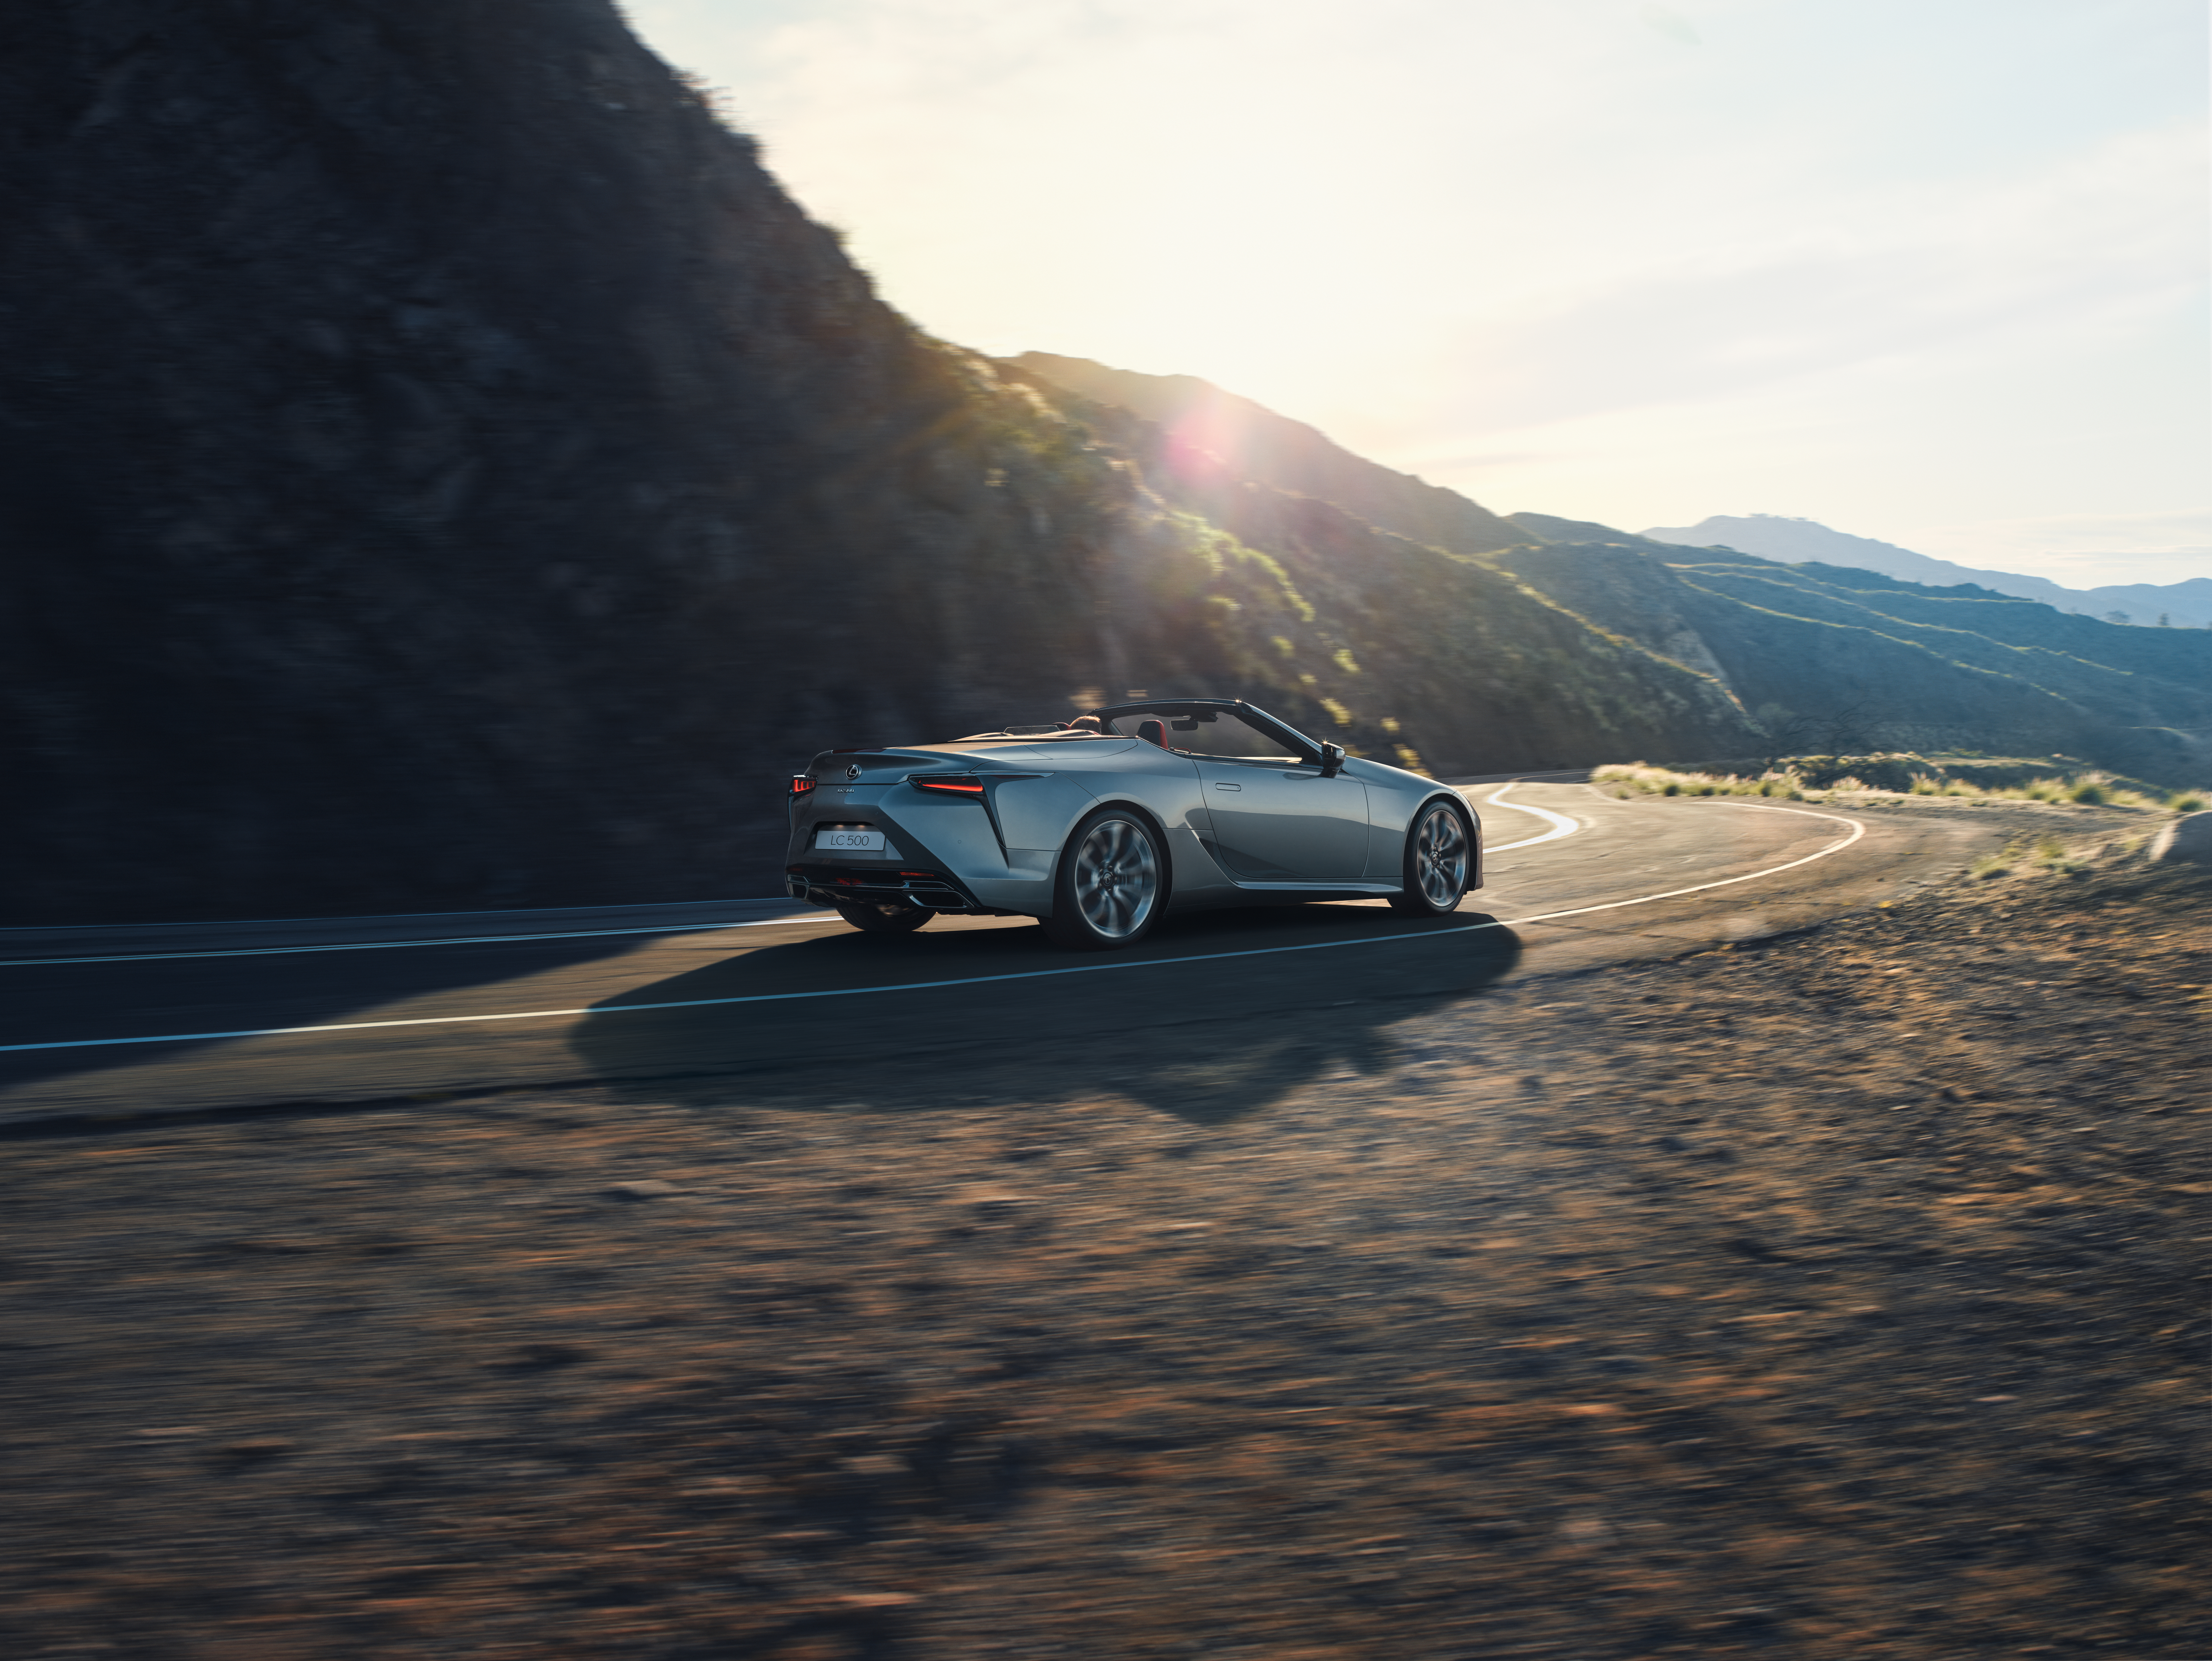 Lexus LC convertible driving around a corner in a mountainous location 